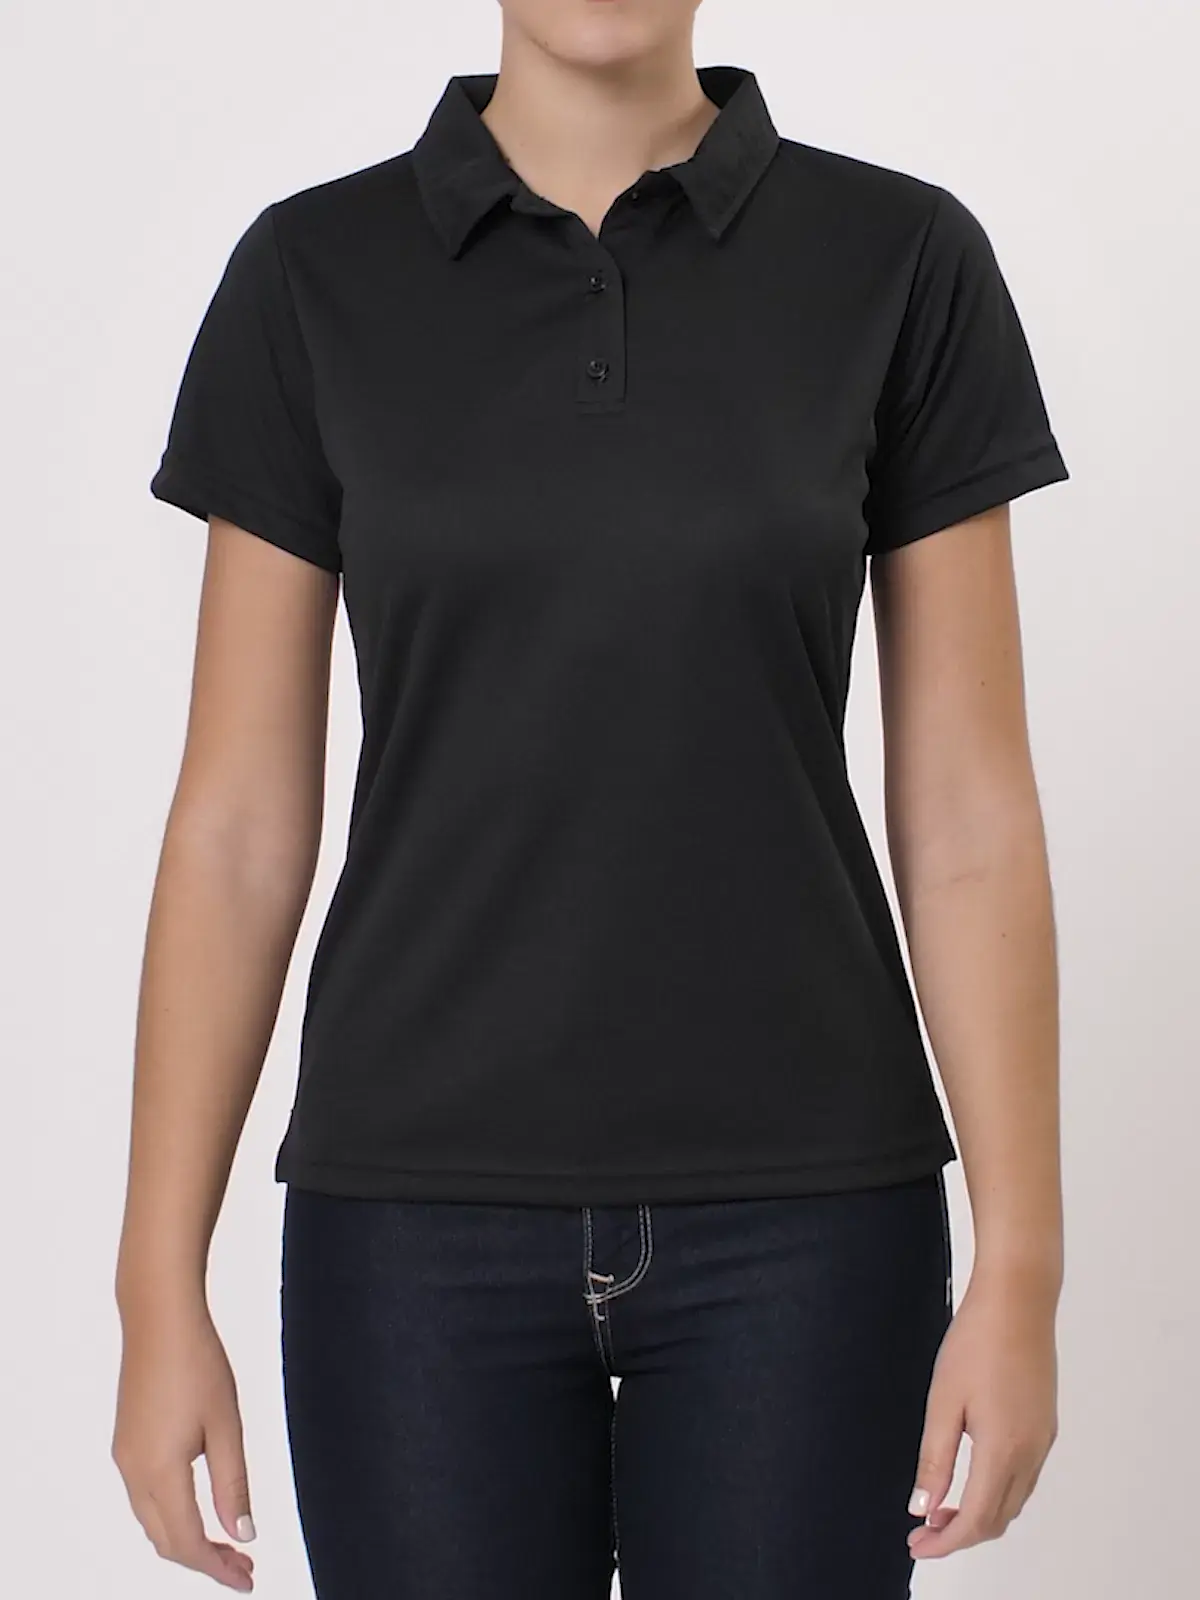 Women's Dry Fit Work Polo in Texas, Lazzar 